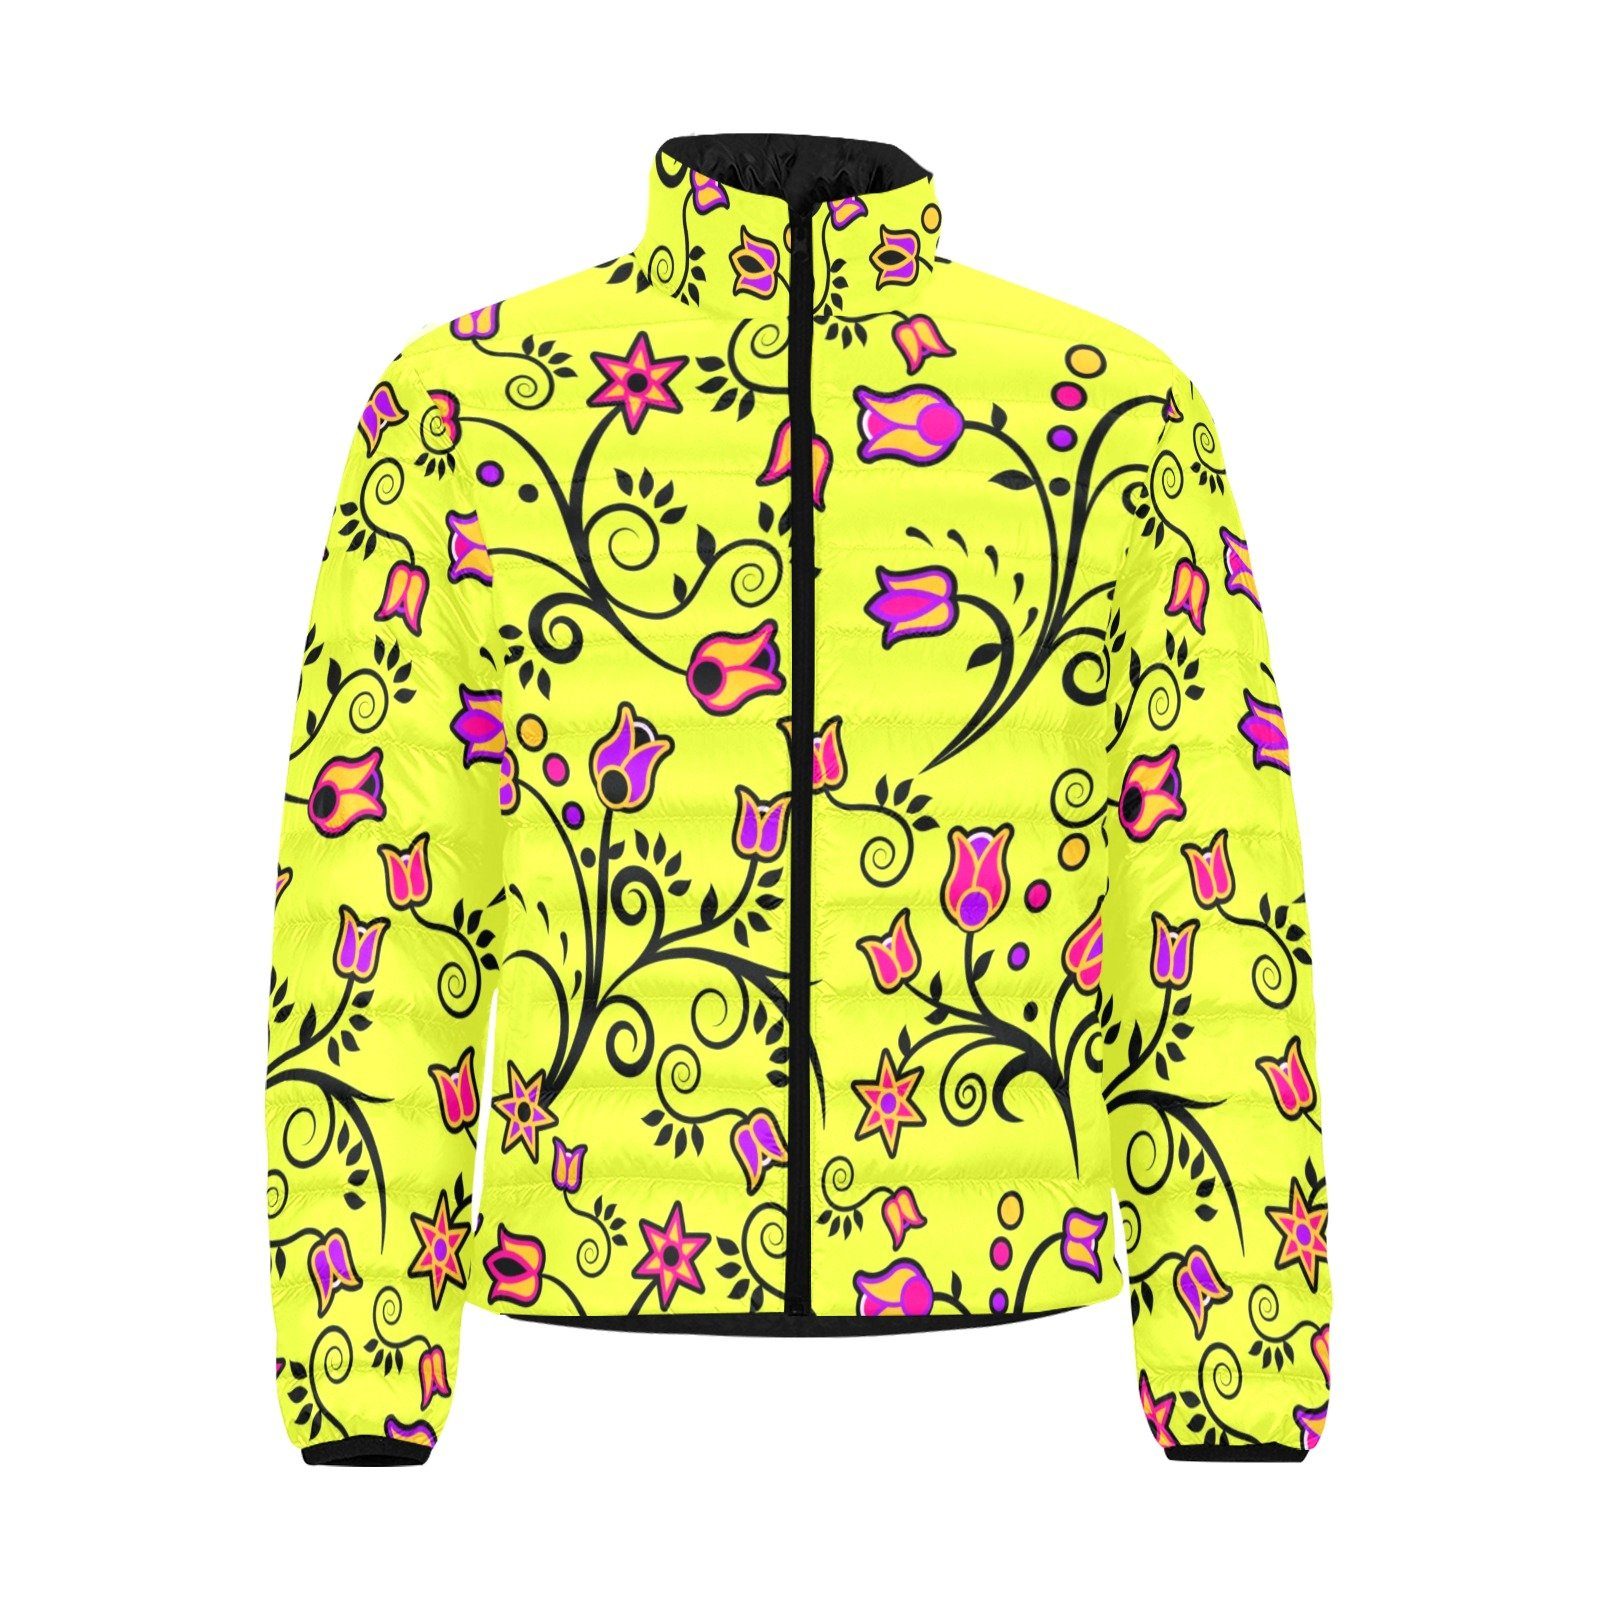 Key Lime Star Men's Stand Collar Padded Jacket (Model H41) Men's Stand Collar Padded Jacket (H41) e-joyer 